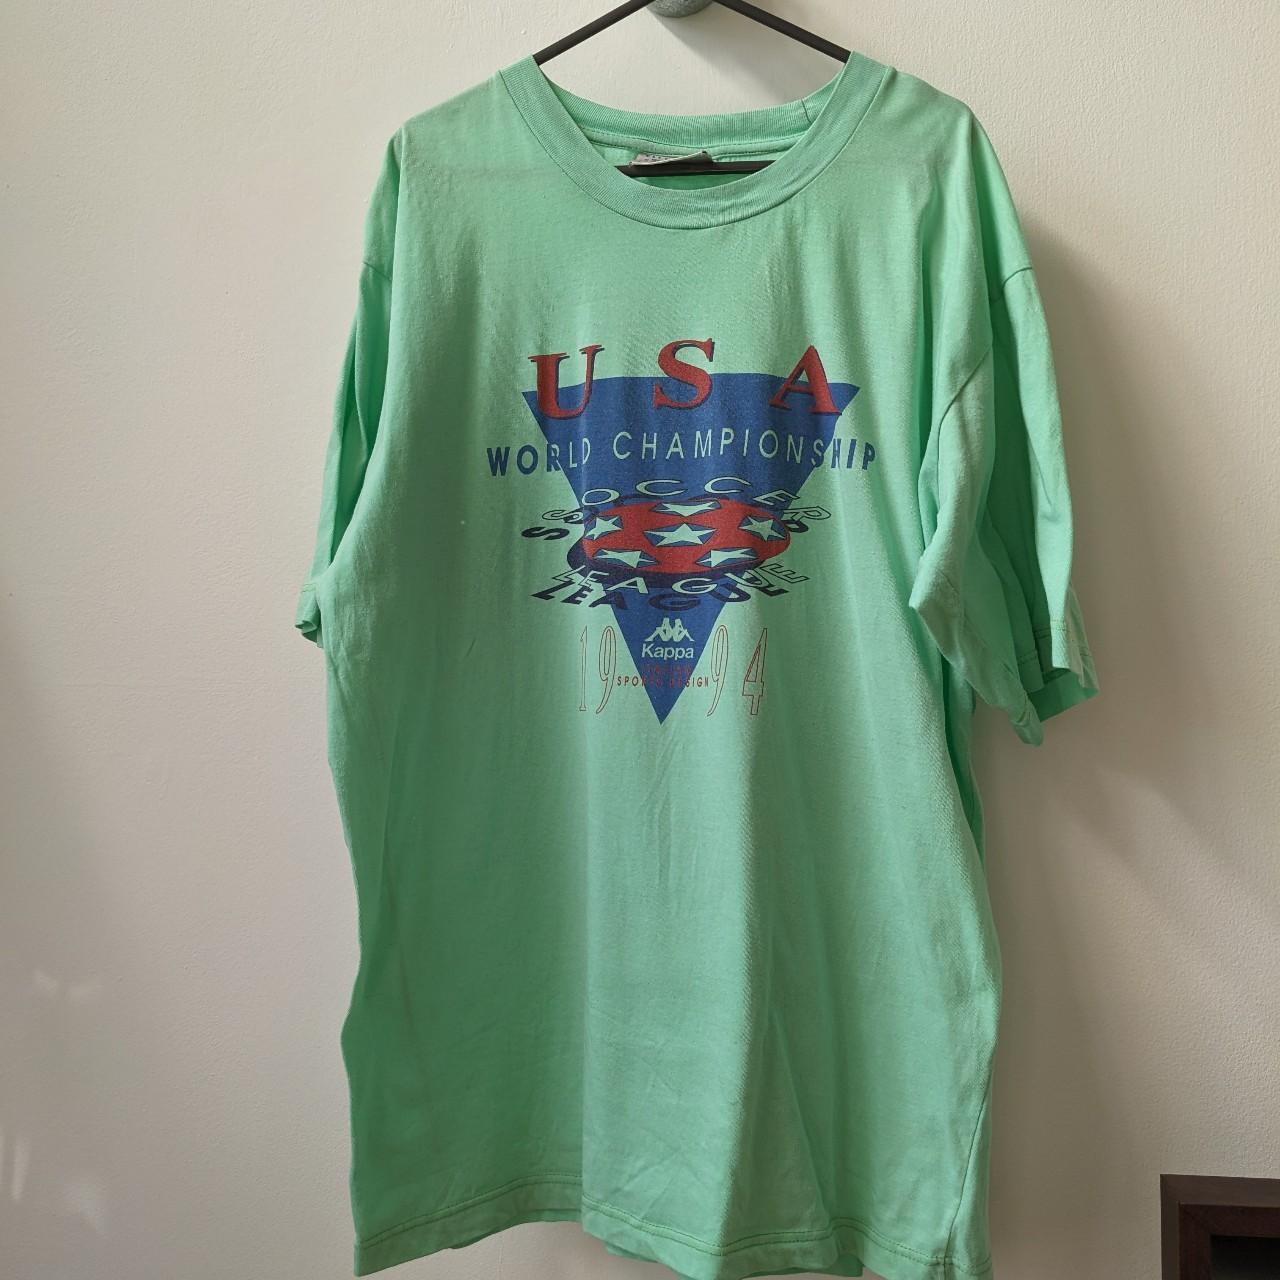 Vintage kappa soccer t-shirt Bought here but not my... - Depop